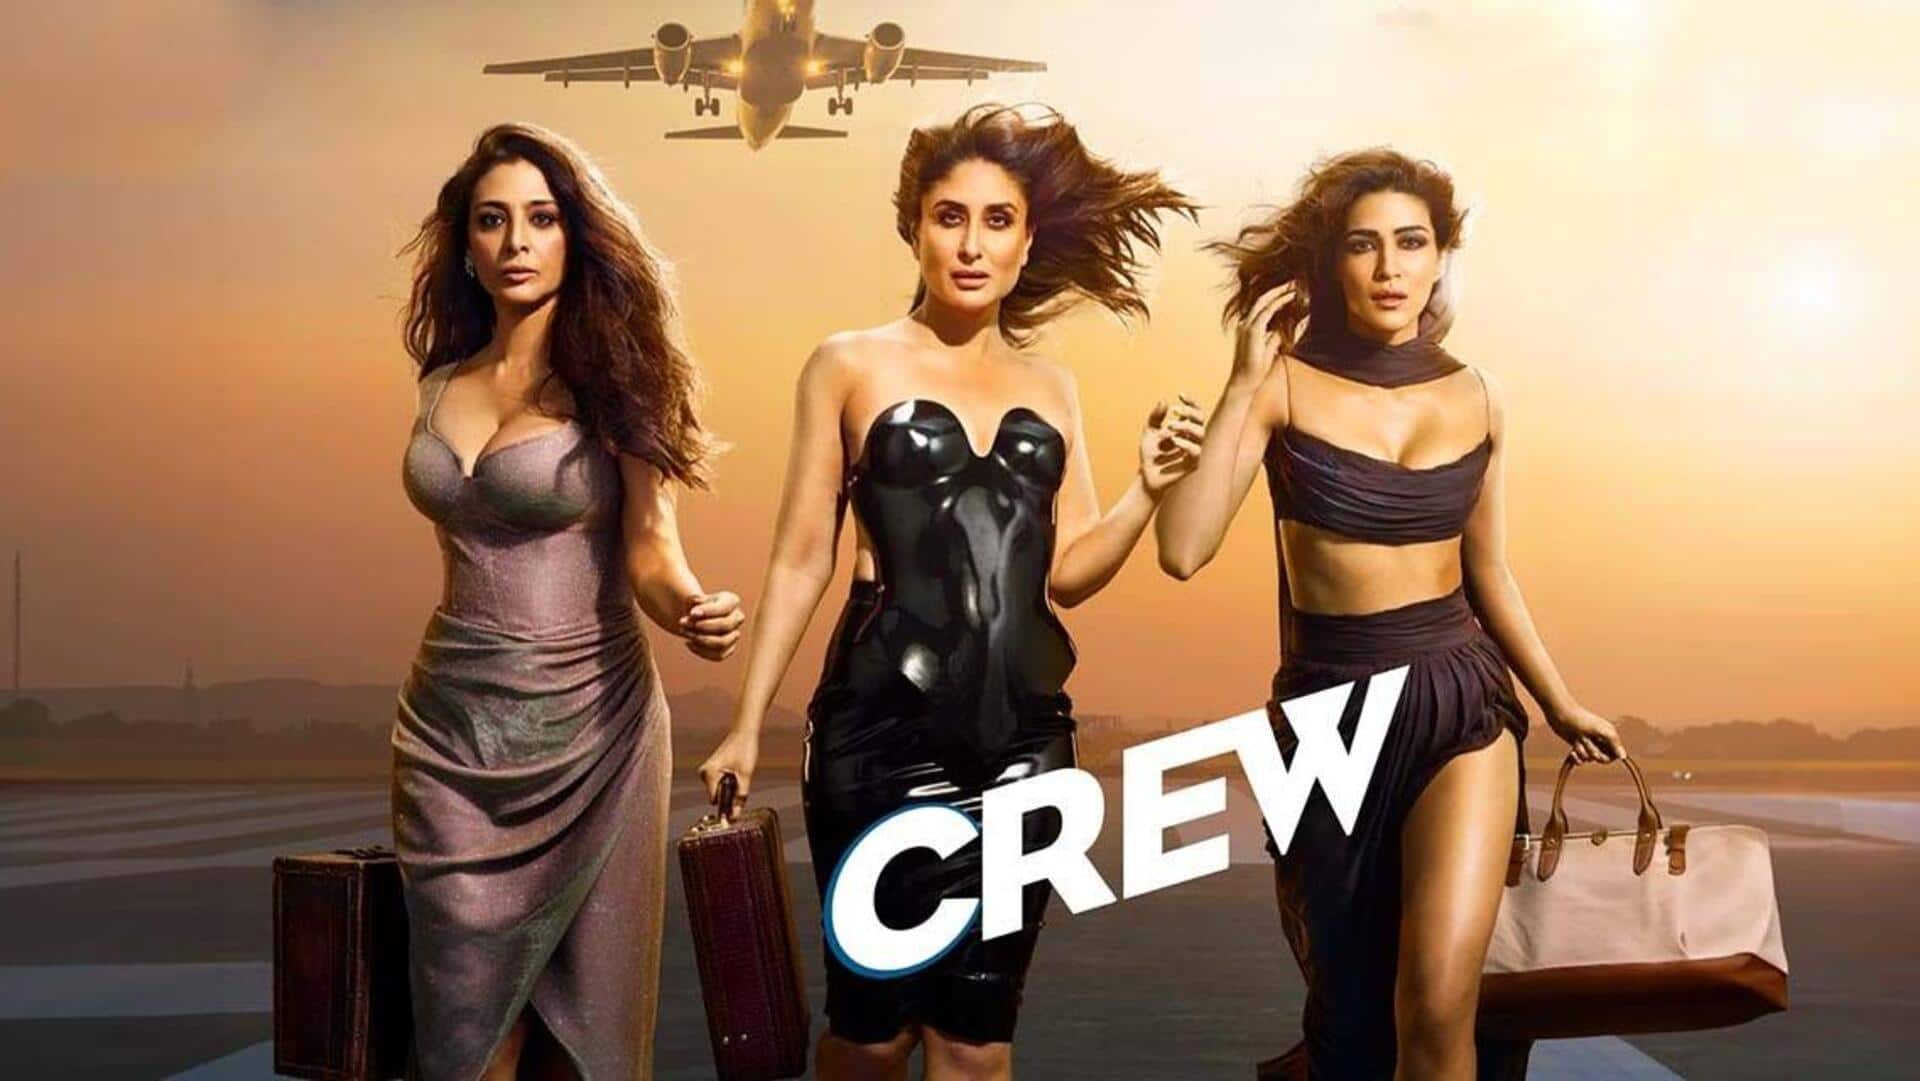 Box office collection: 'Crew' stands tall amid Bollywood biggies